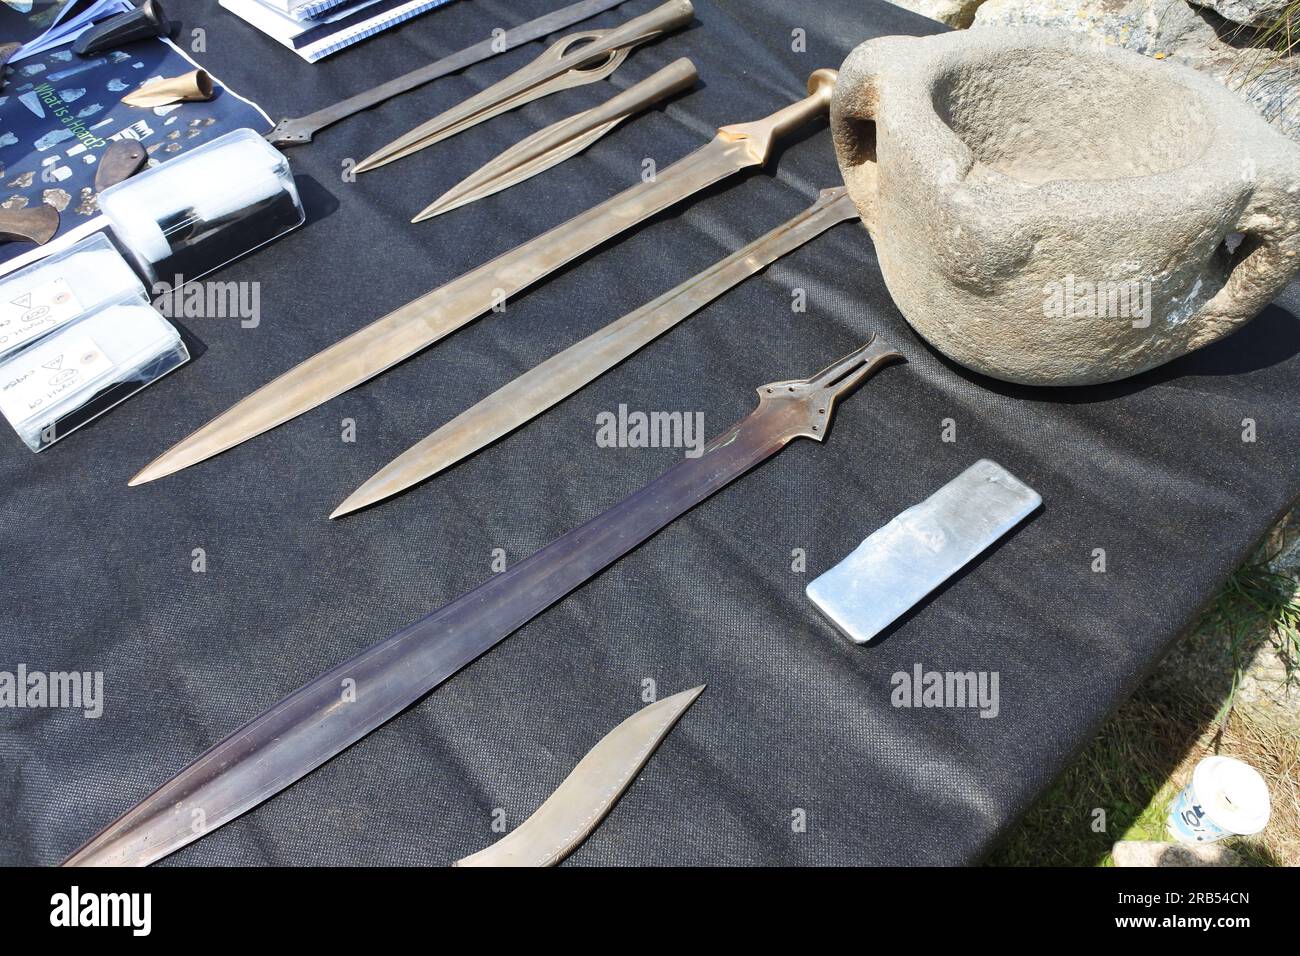 Reproduction bronze age swords, daggers and knives at a finds table at an archaeological dig at St. Michael's Mount, Cornwall, UK - John Gollop Stock Photo